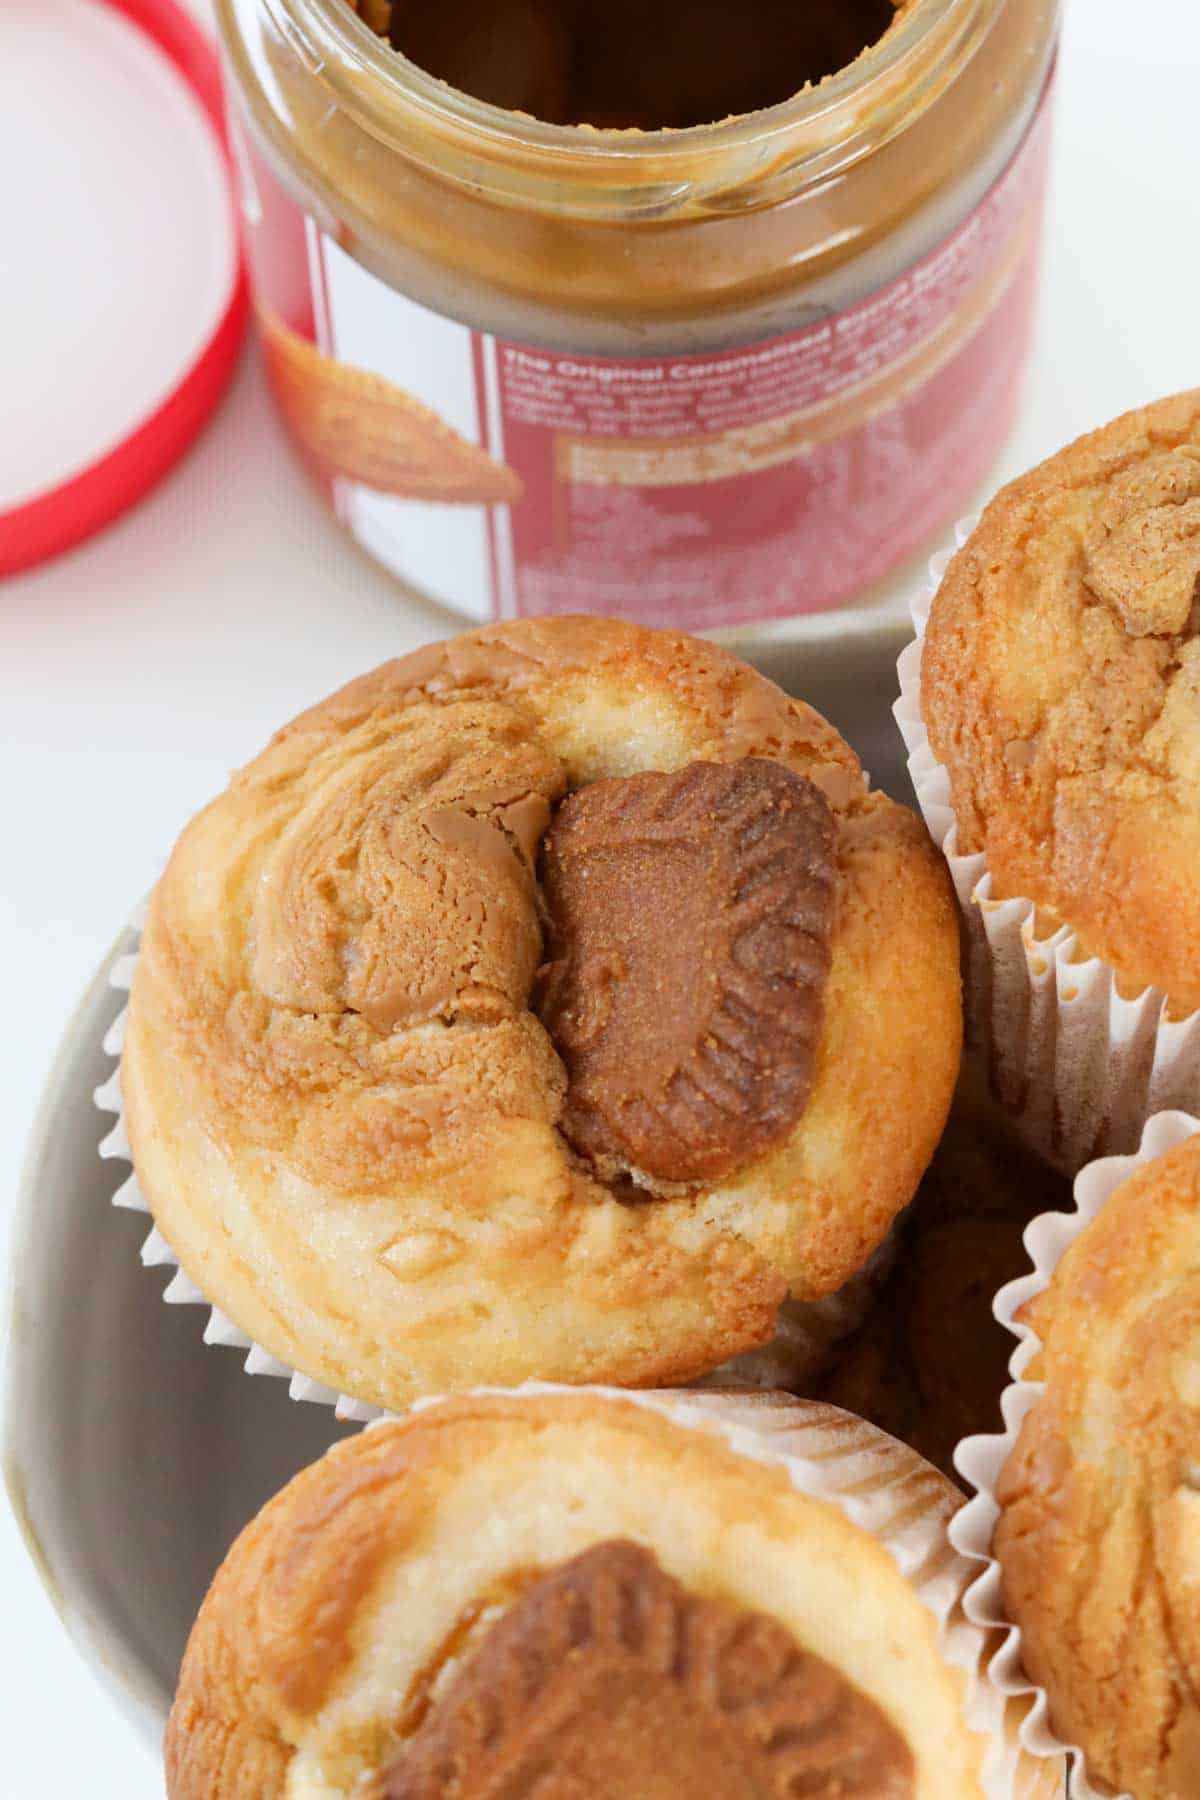 Muffins with a piece of Biscoff biscuit baked into the top.